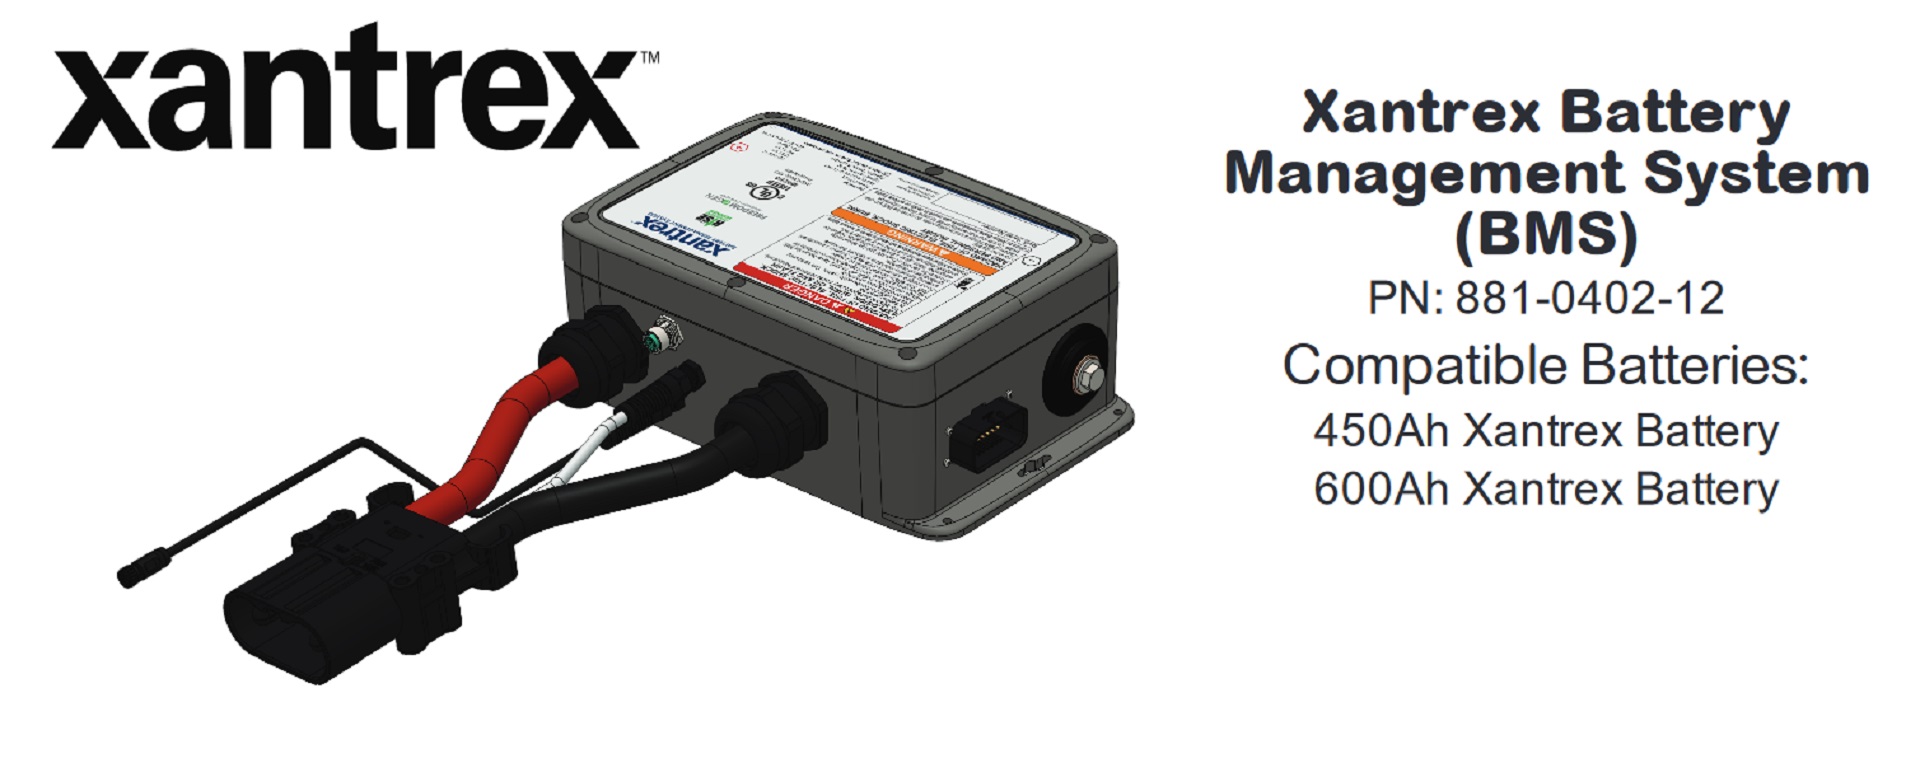 Photo of a Xantrex external BMS that will prevent thermal runaway.